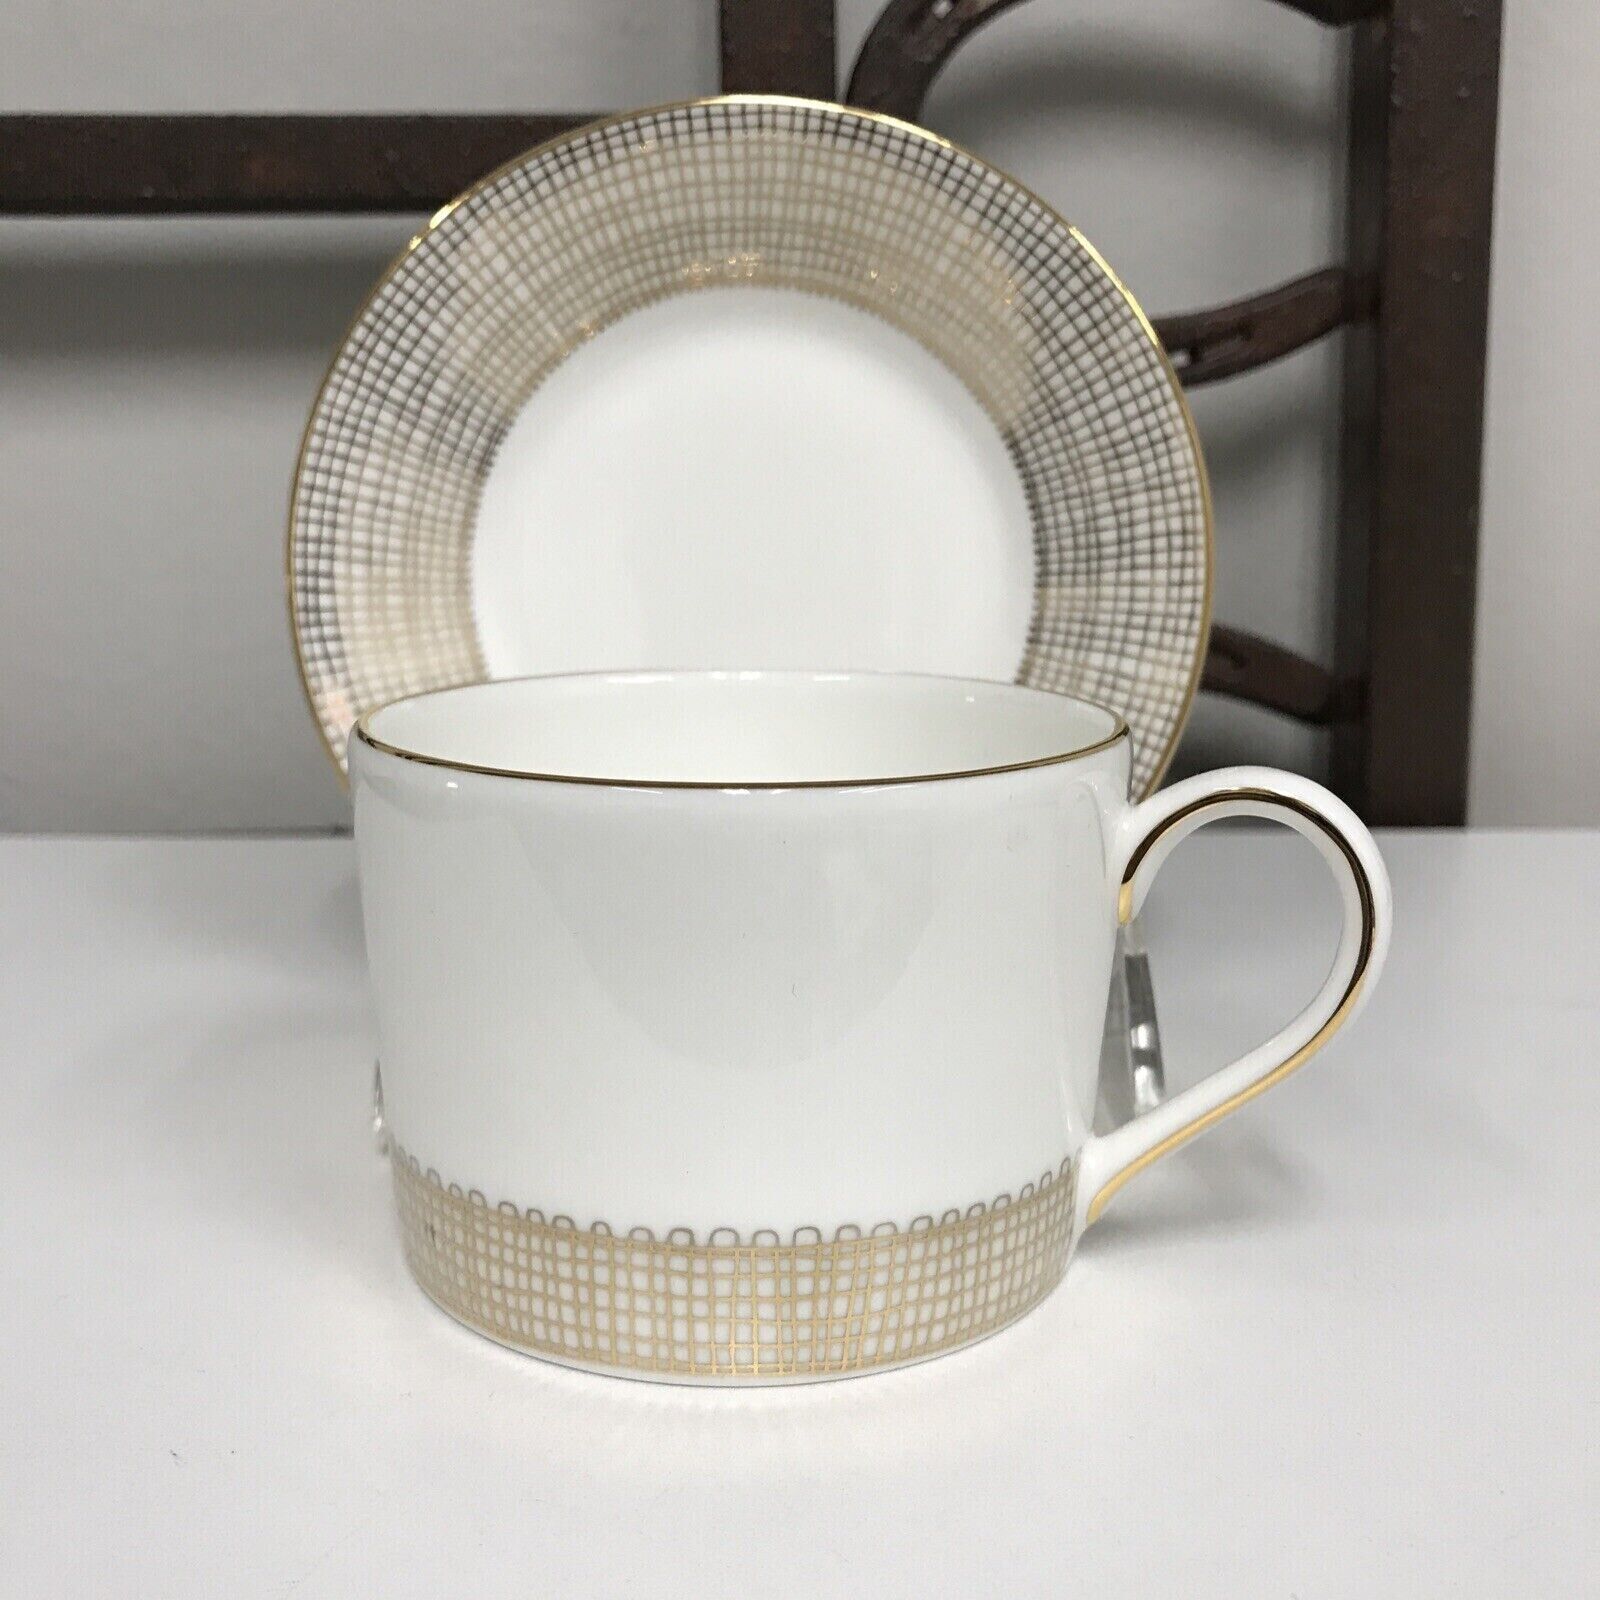 Vera Wang Gilded Weave Cup And Saucer